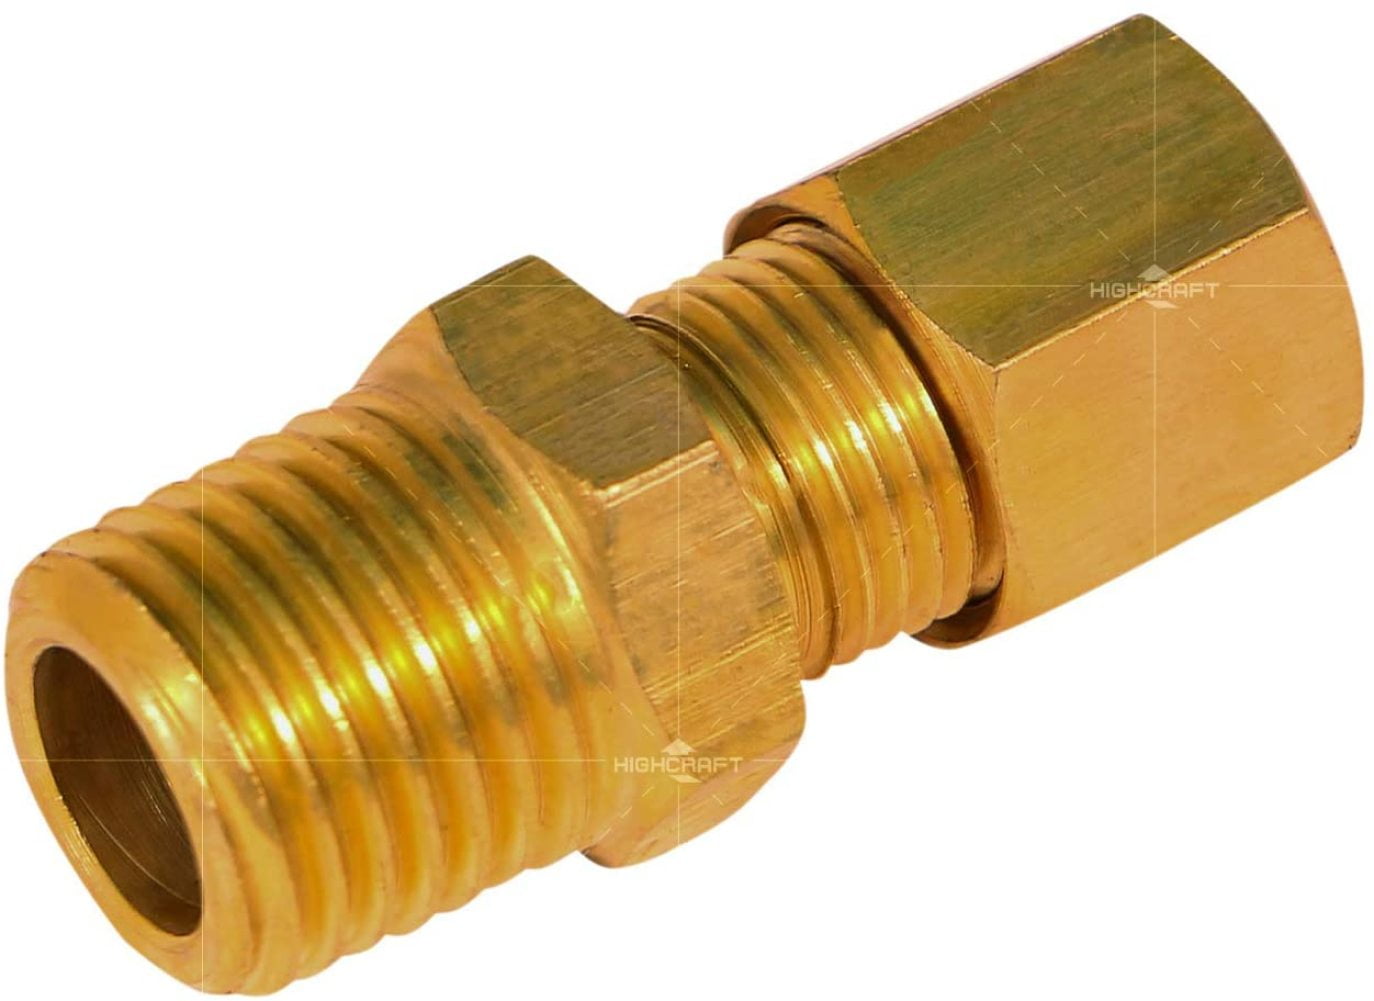 Highcraft Compression 90 degrees Elbow Pipe Fitting; OD.; Lead Free Brass 